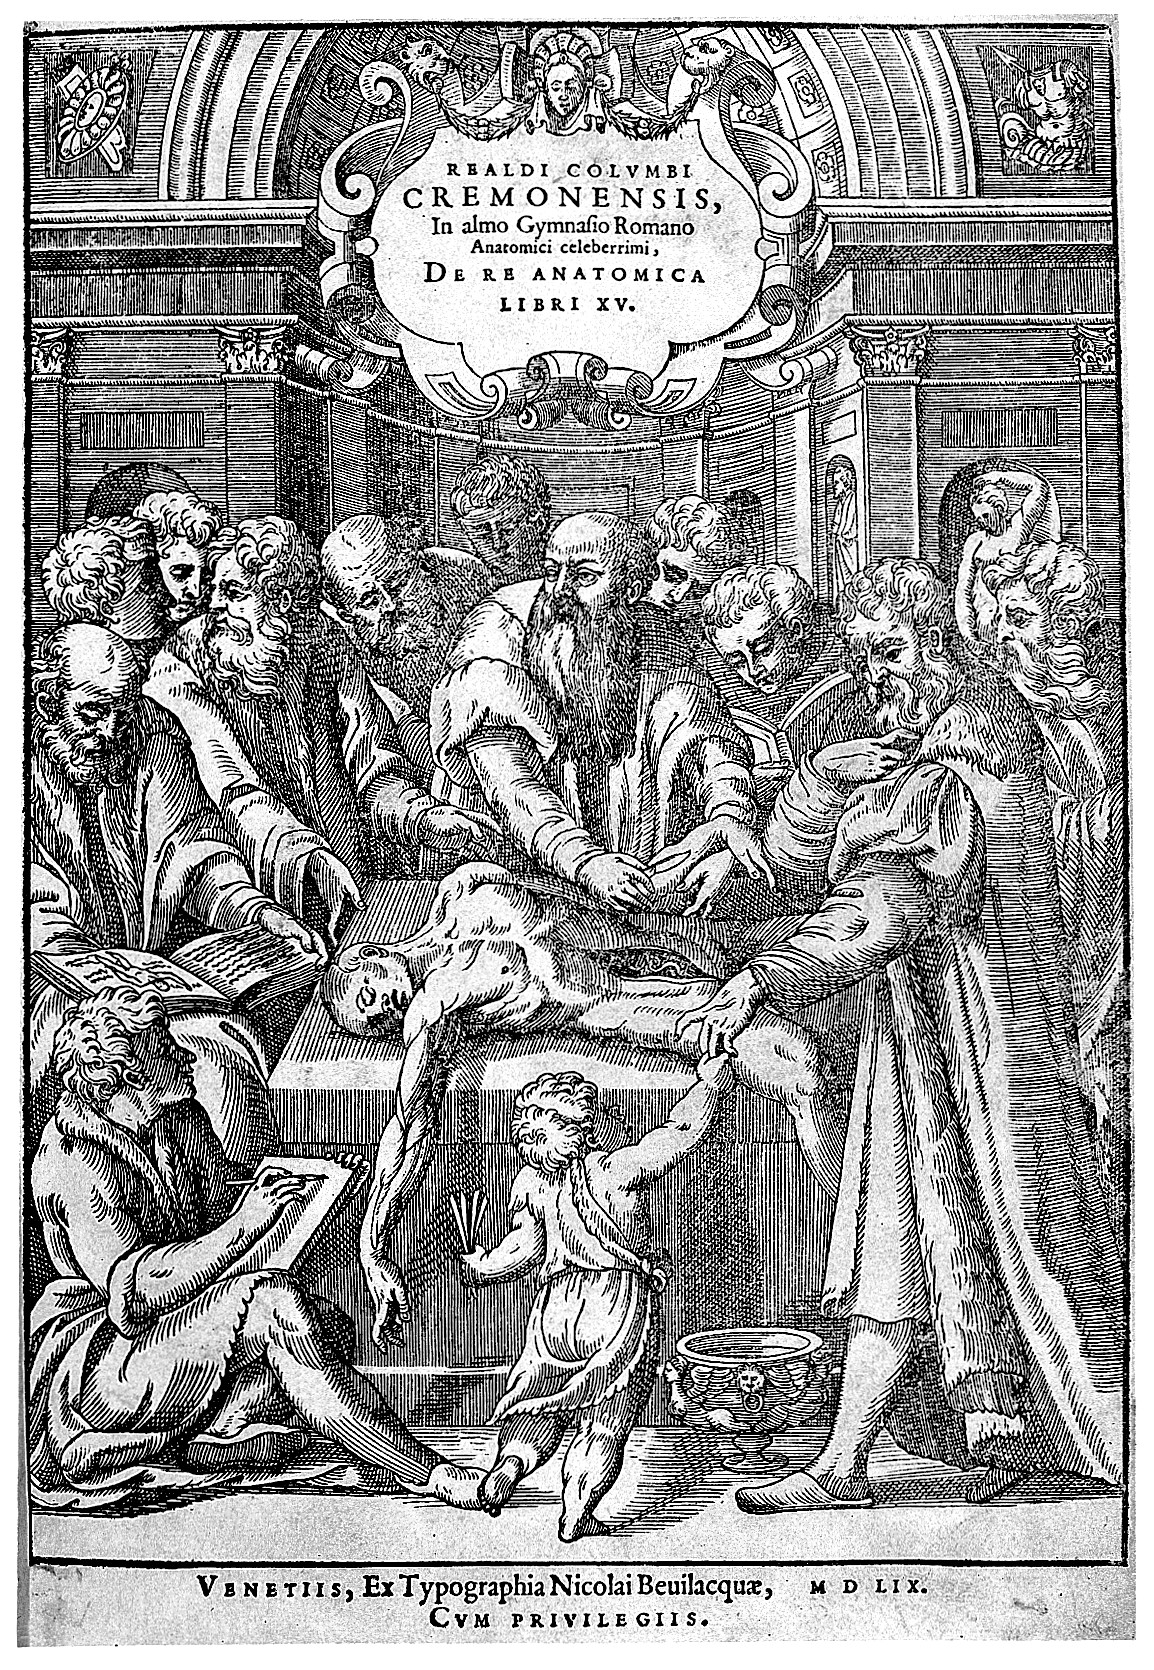 An ancient black and white book cover, showing a surgery.